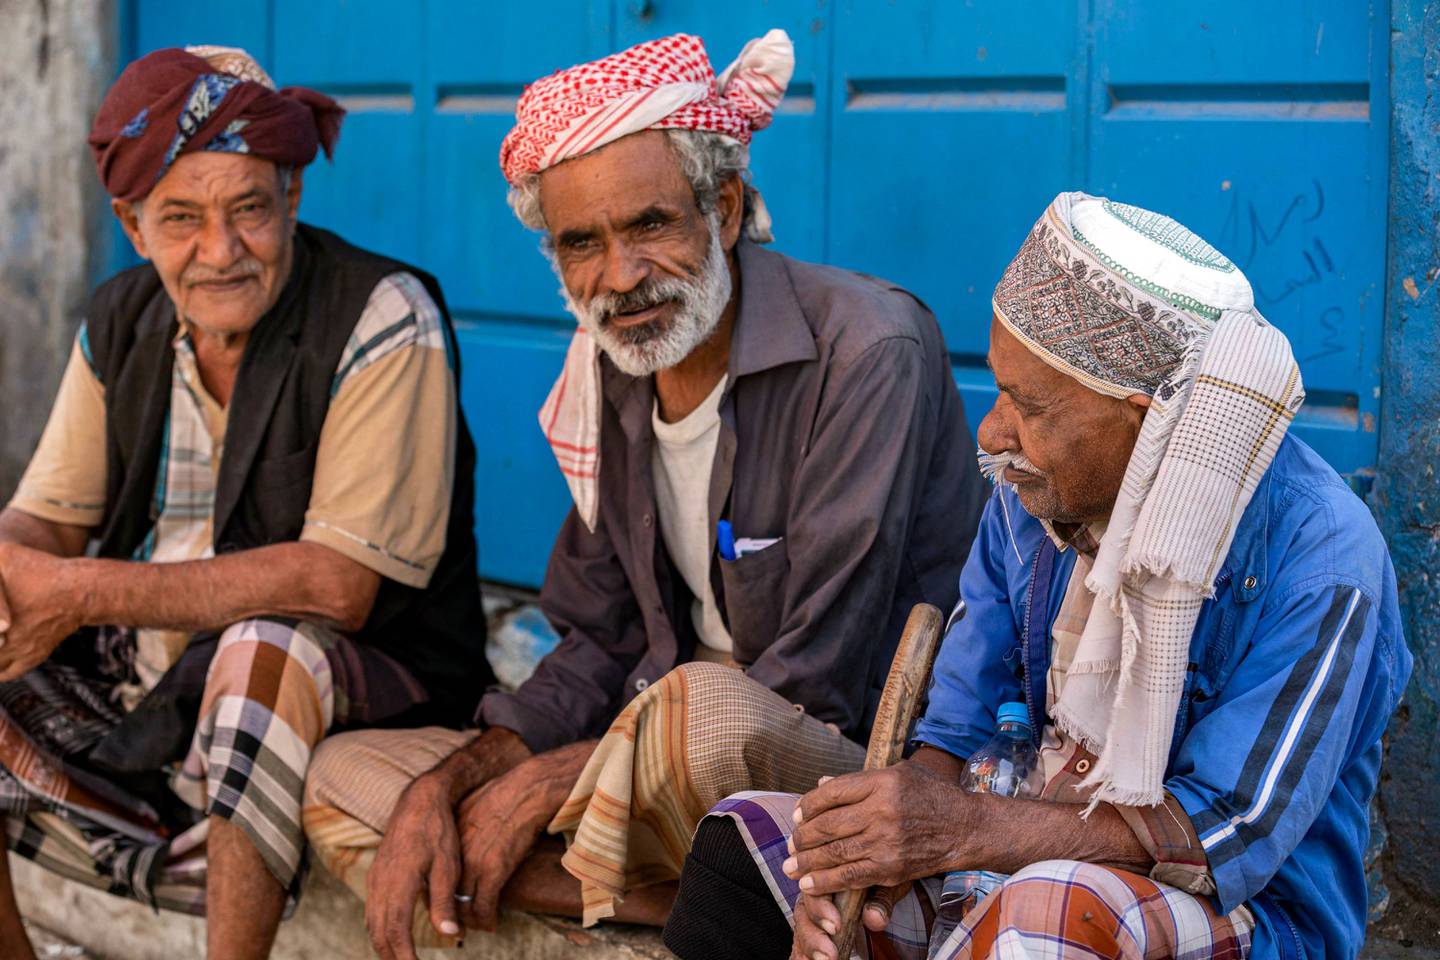 Men sit together in an open-air market in Yemen's third city of Taez. Reopening roads and other transport links to the city have been a major issue in negotiations. AFP